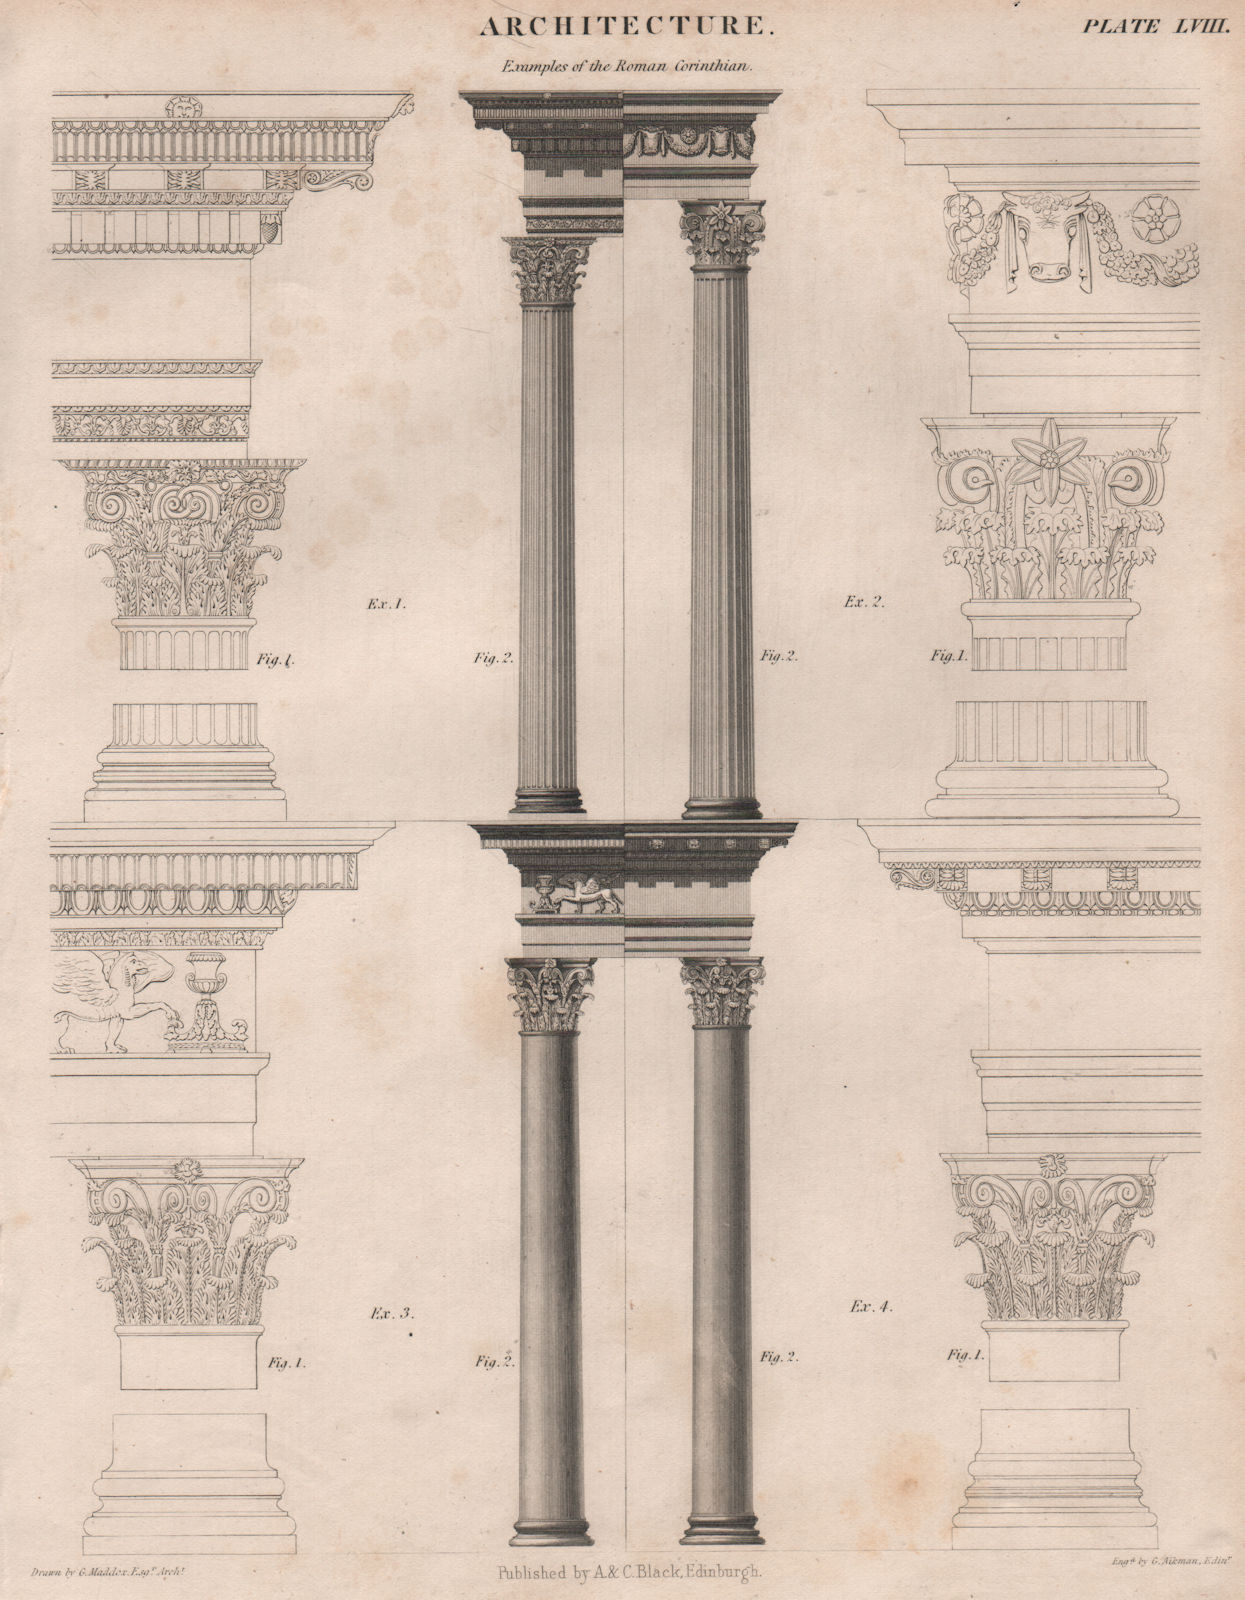 Associate Product Architecture. Examples of the Roman Corinthian. BRITANNICA 1860 old print